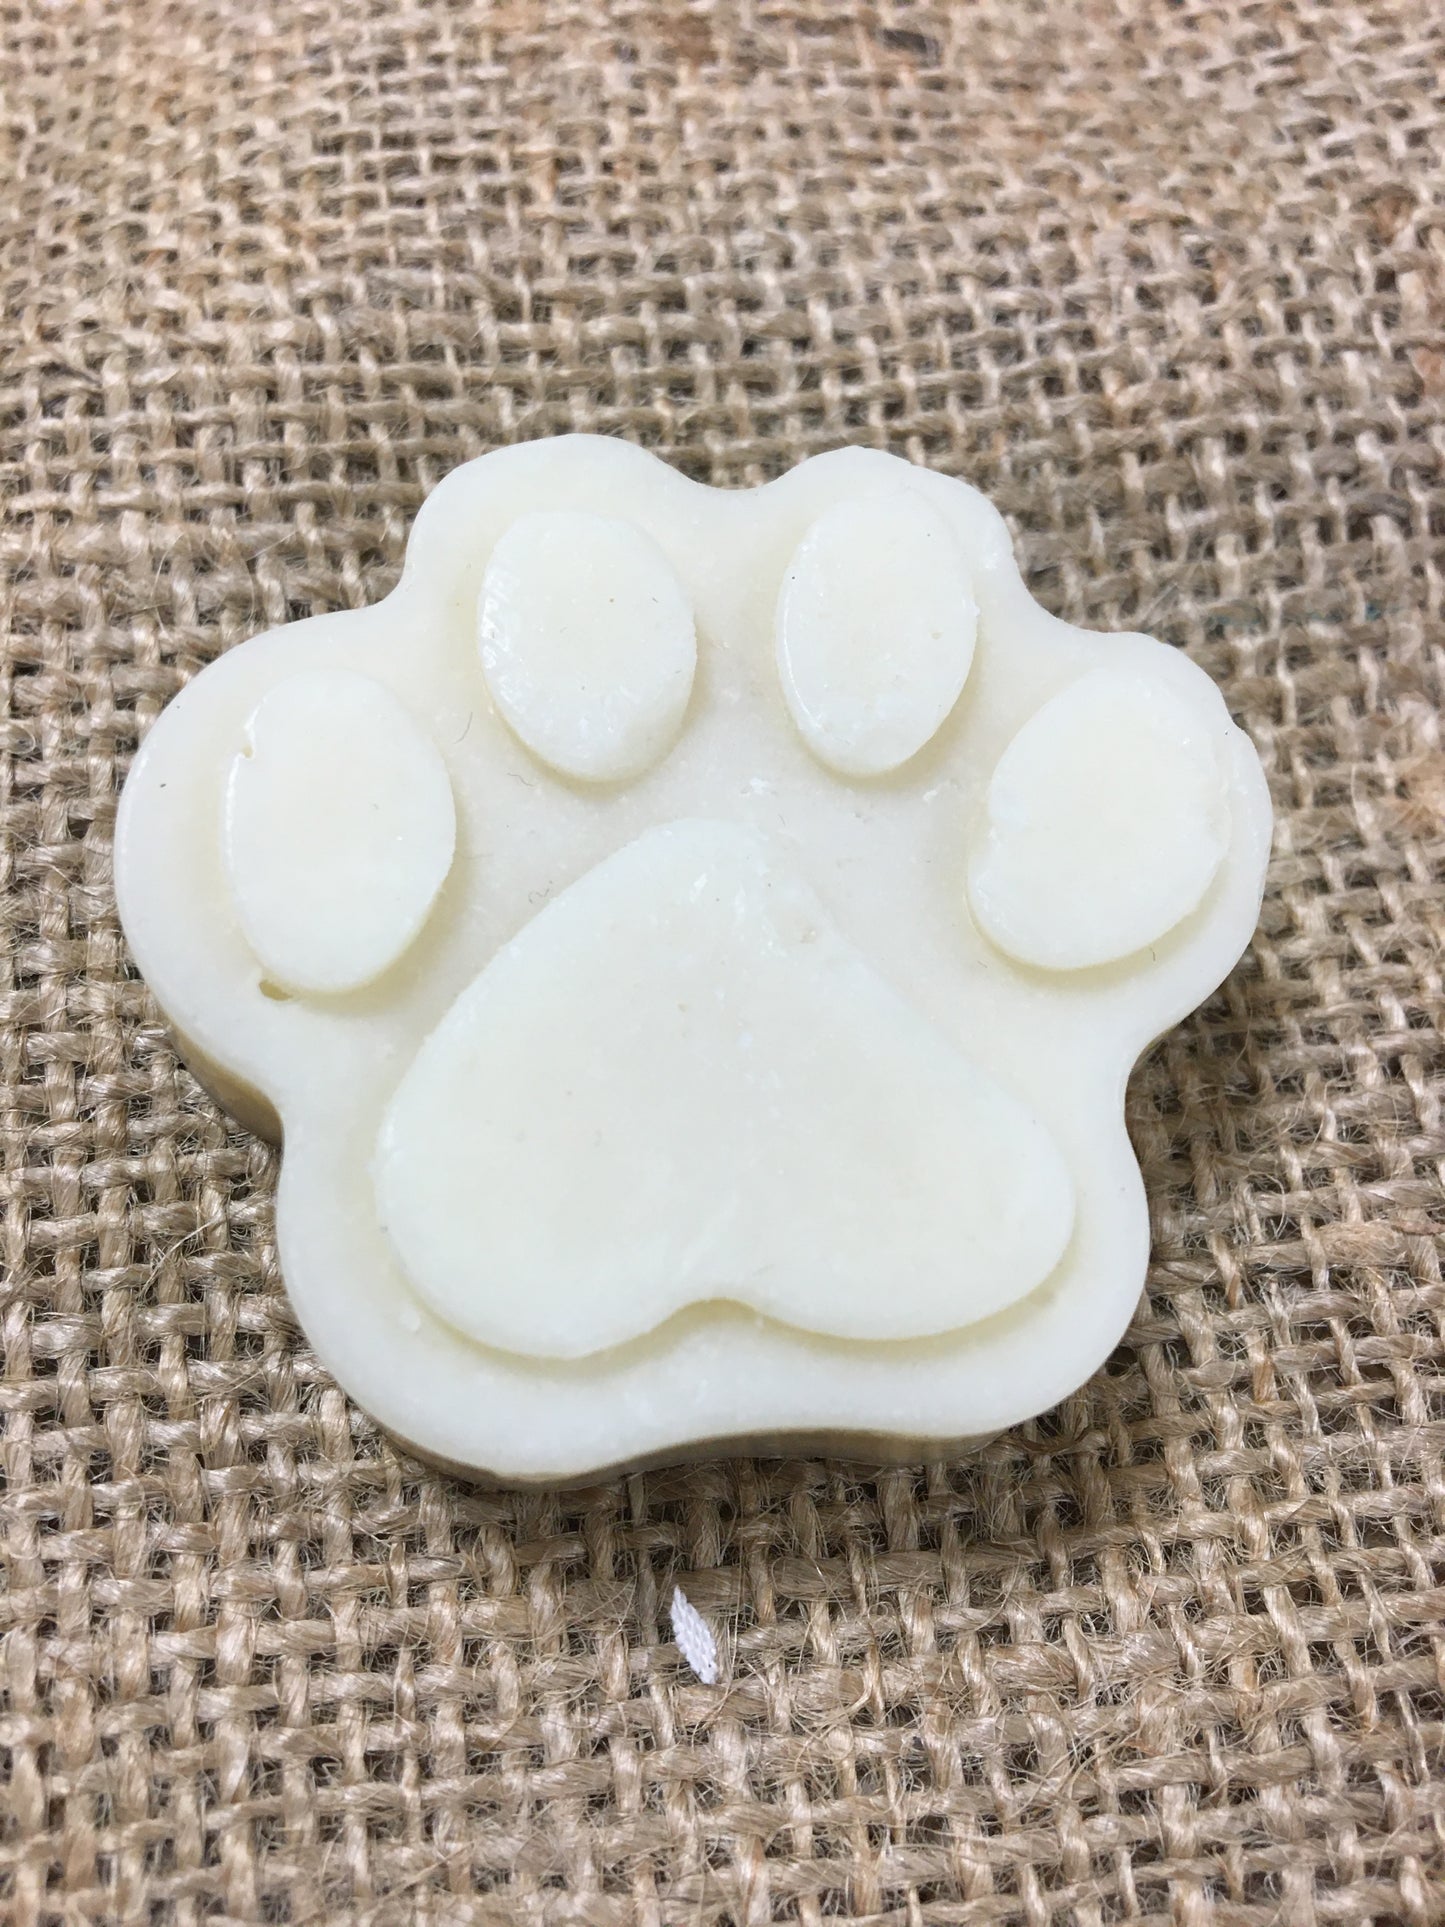 Dog Shampoo in the shape of a paw print